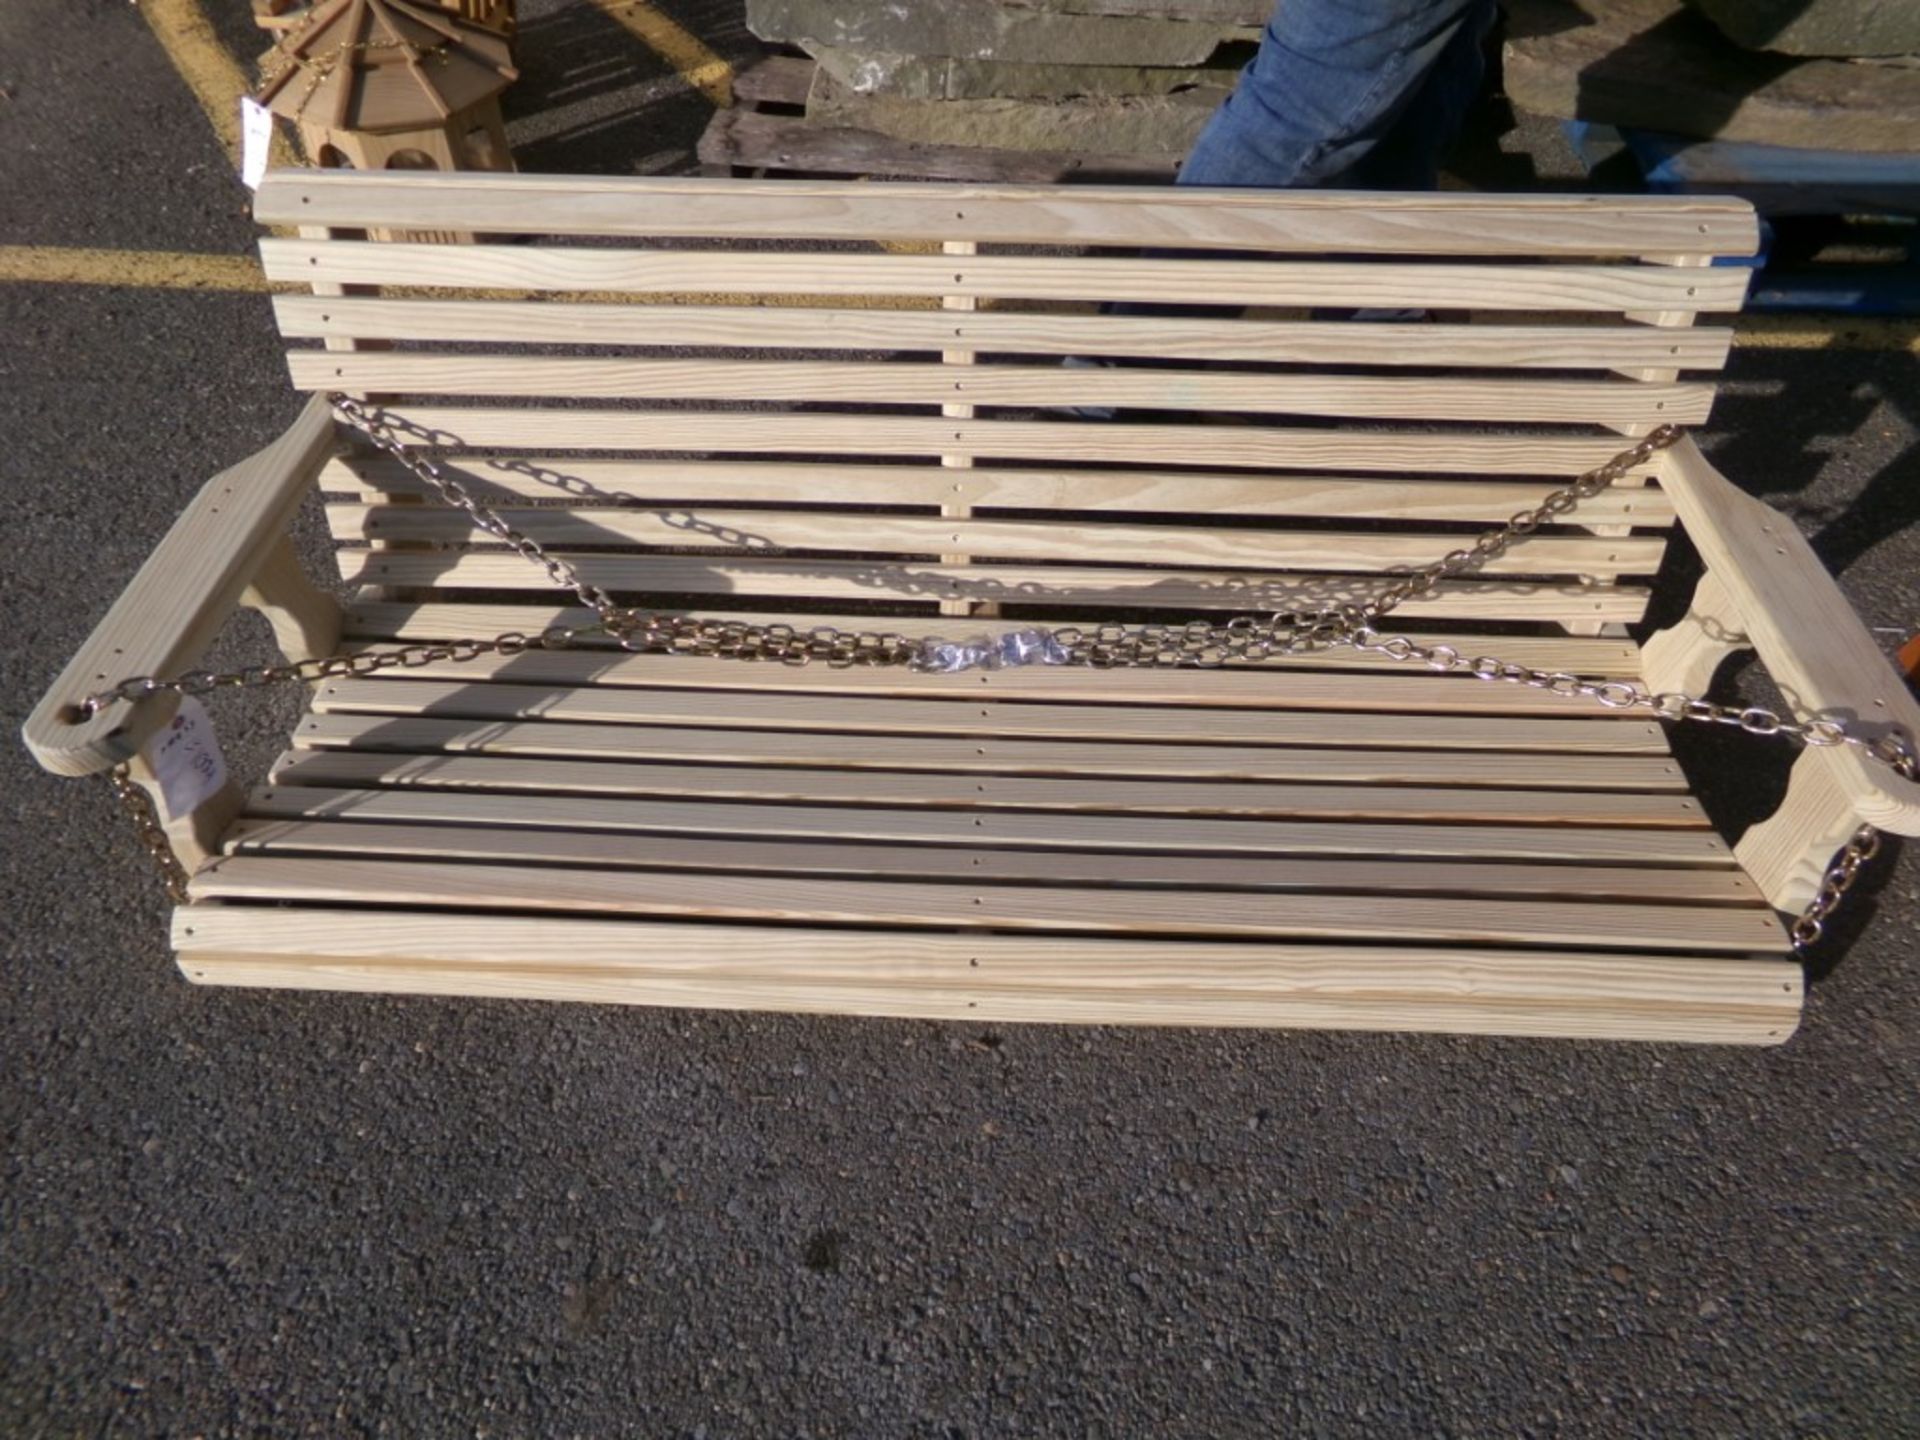 Unfinished Amish Made 5' Roll Back Porch Swing (4483)